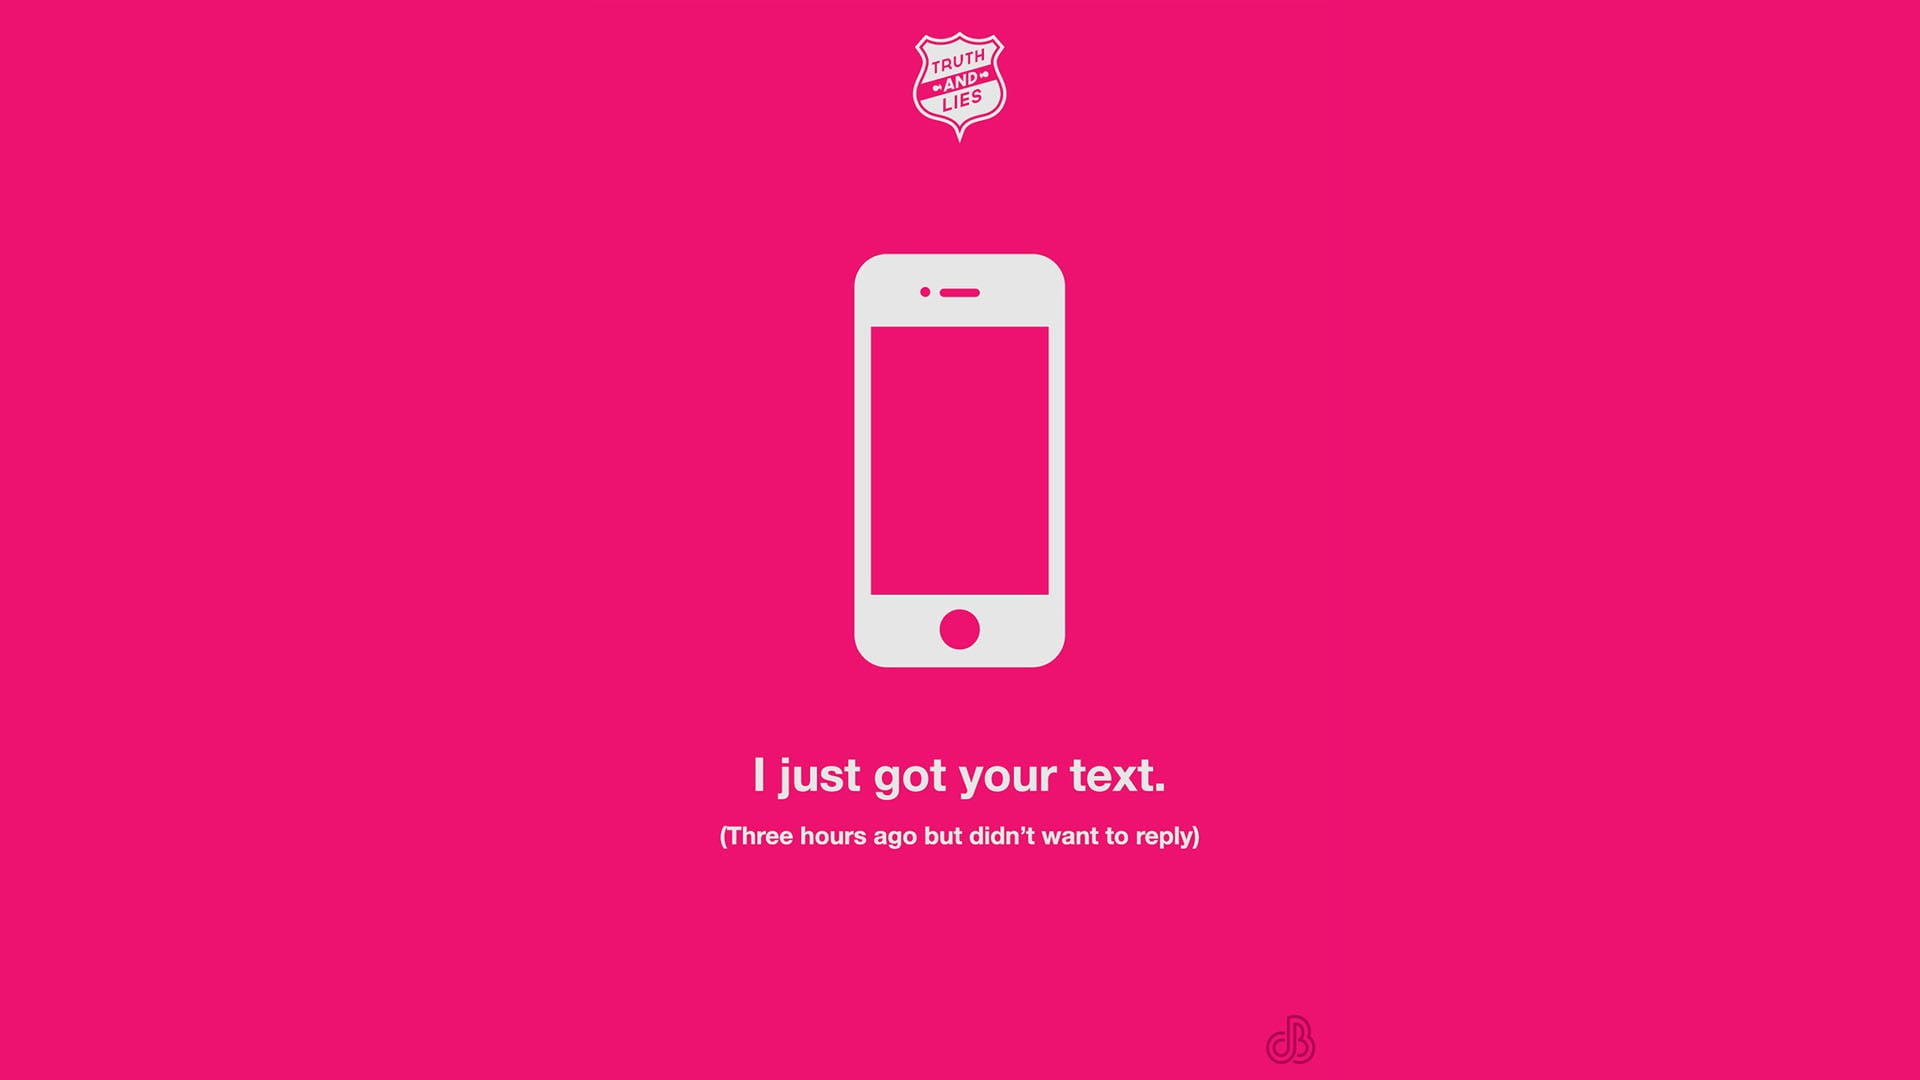 i just got your text on pink background, Justin Barber